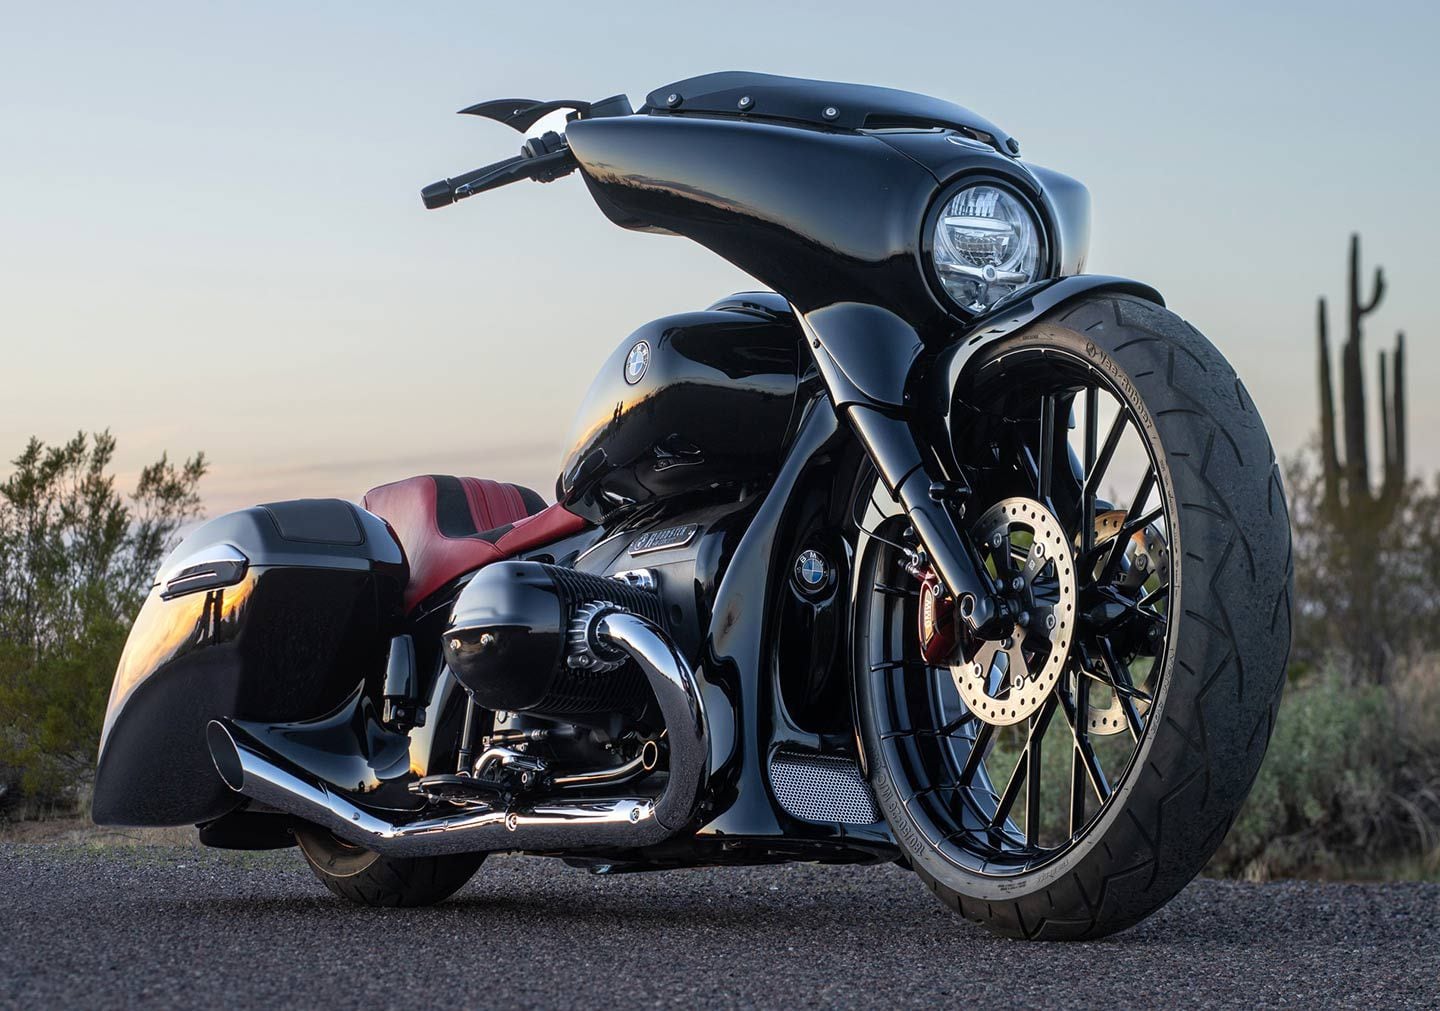 The Transcontinental’s original front fairing was reconstructed to better flow with the new front wheel, while a new chin fairing was created to cleverly hide the radiator.